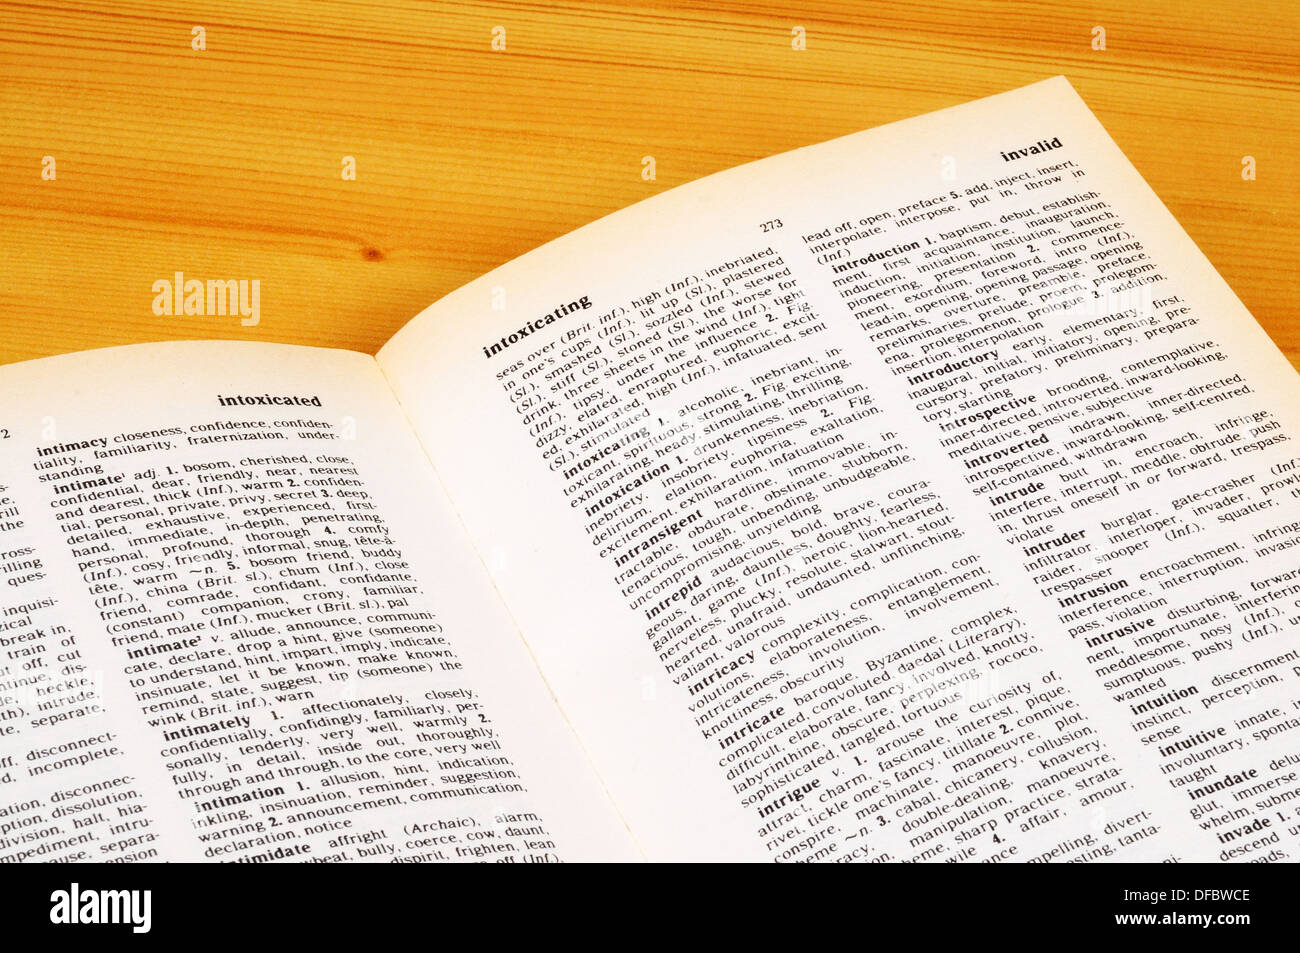 Pages of a Thesaurus against wooden background. Stock Photo